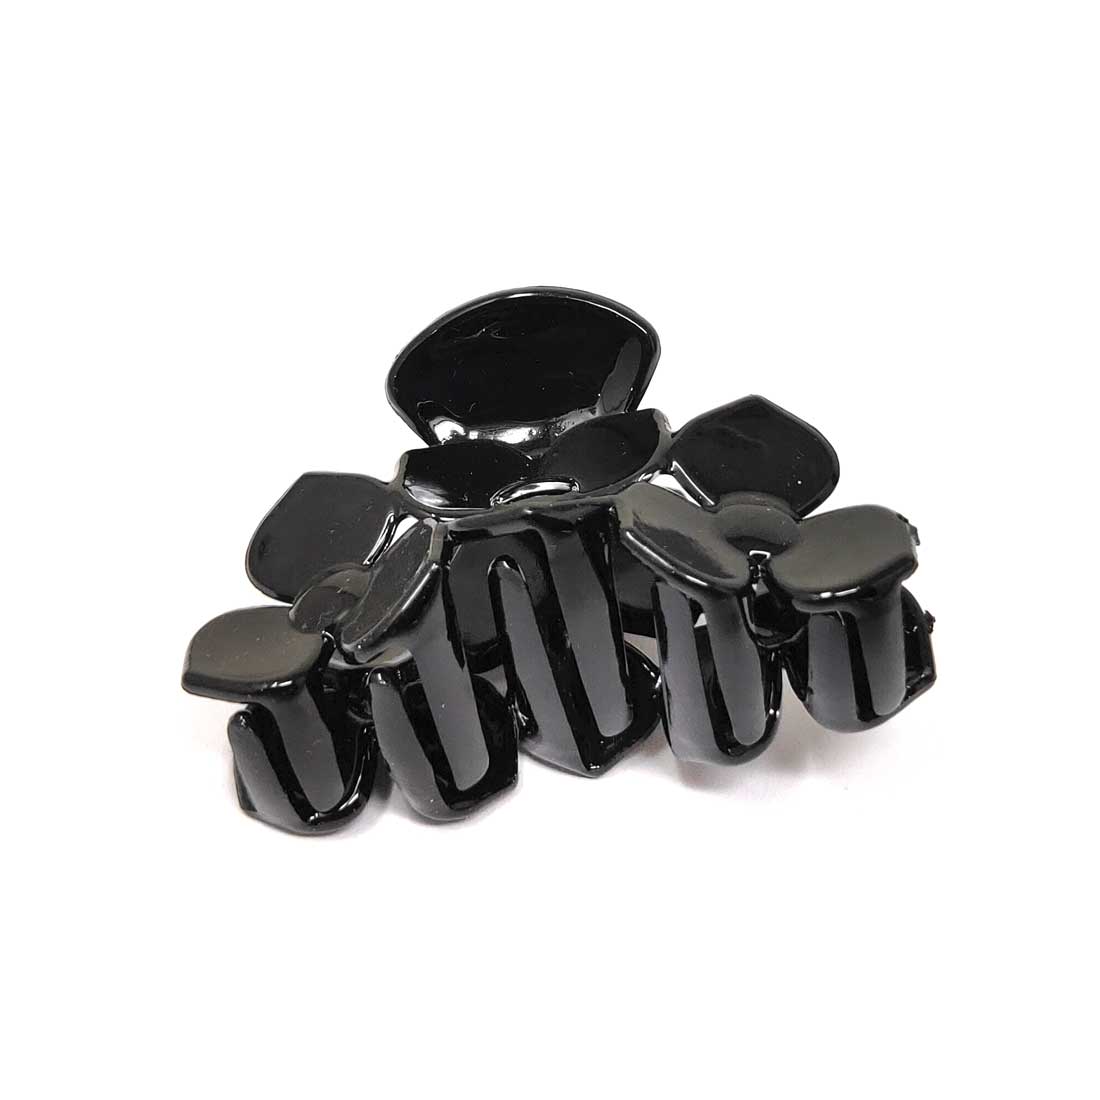 Anokhi Ada Floral Plastic Hair Clutcher/Hair Claw Clip for Girls and Women (Black, Pack of 2) - 01-05C